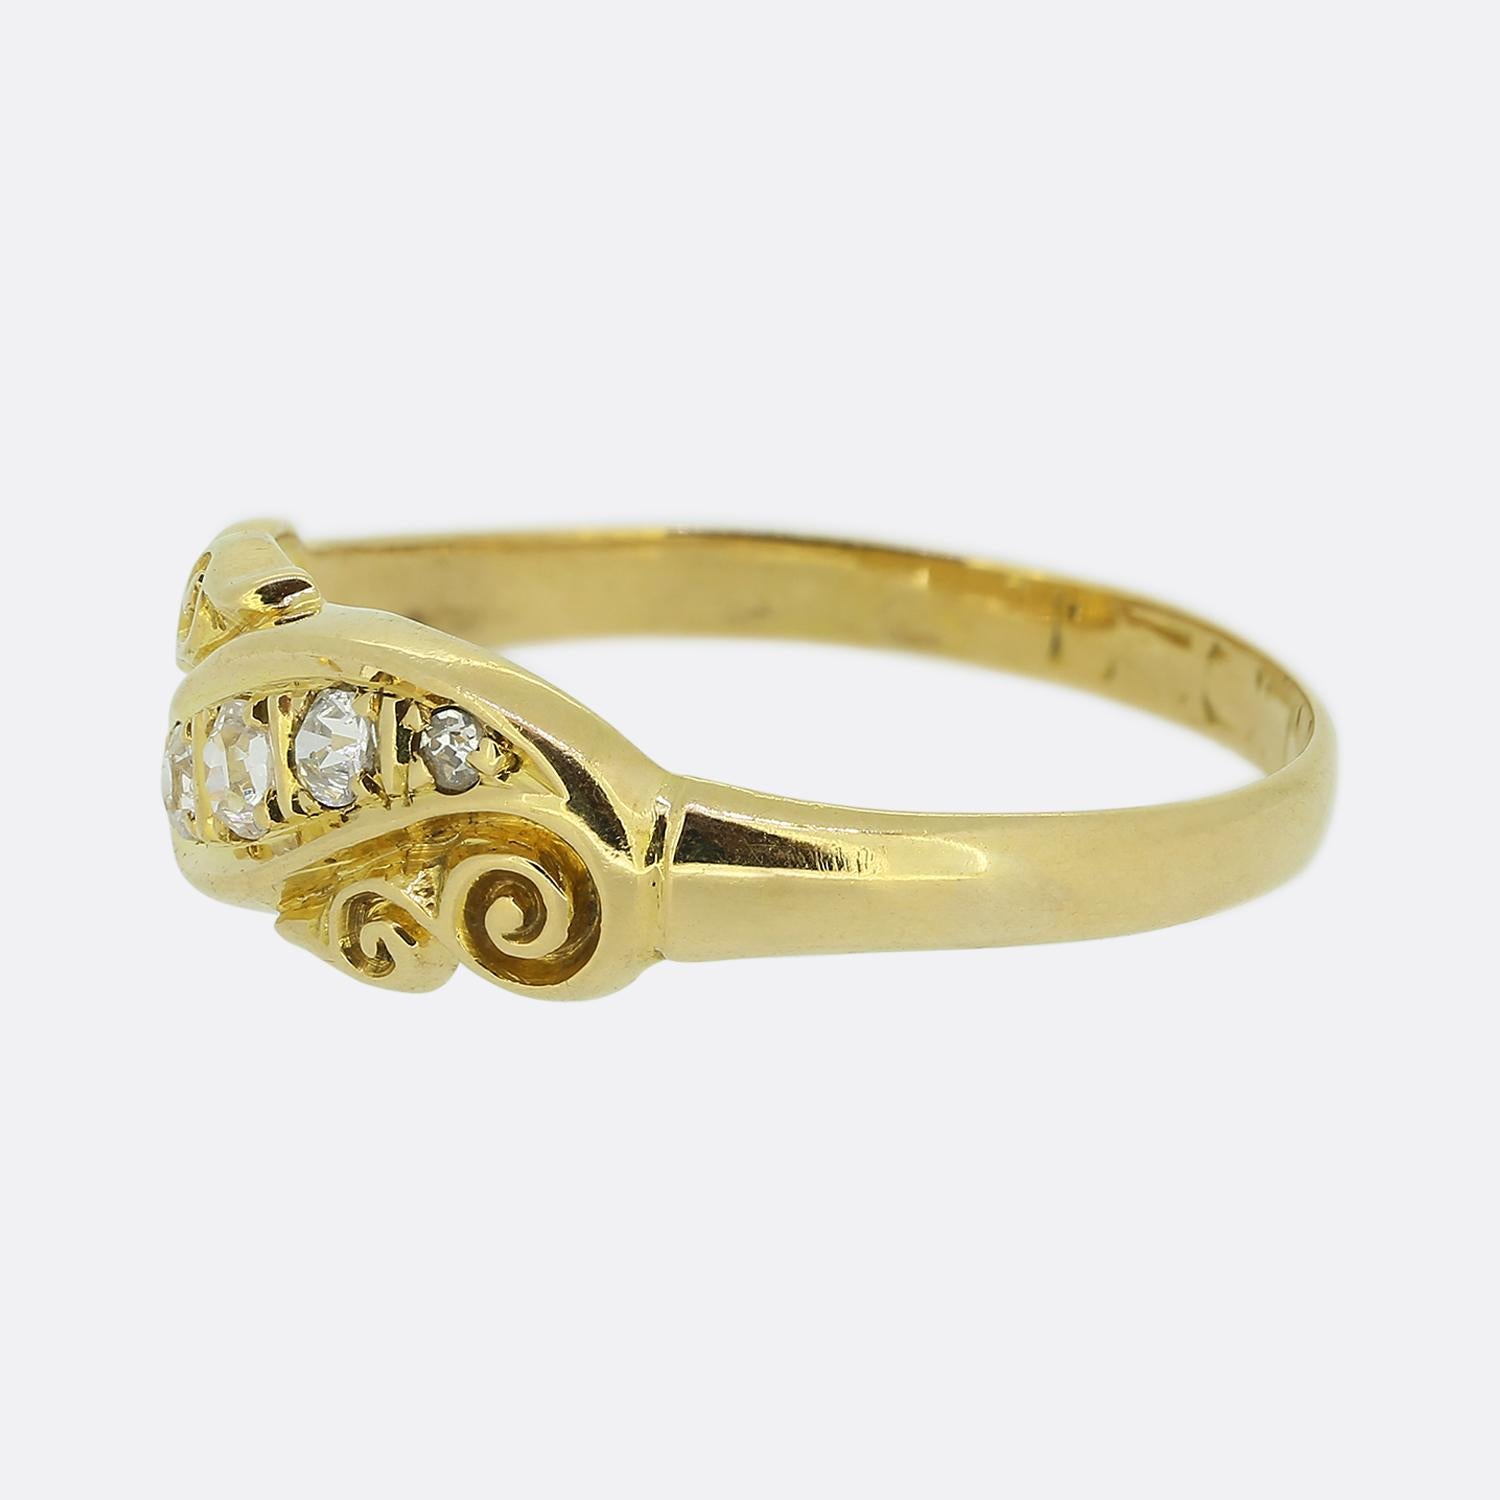 Here we have a delightful twist ring dating back to the Victorian period. This antique piece showcases five round faceted old cut diamonds in a diagonal formation which graduate in size towards the centre. An ornate scrolled design at either side of